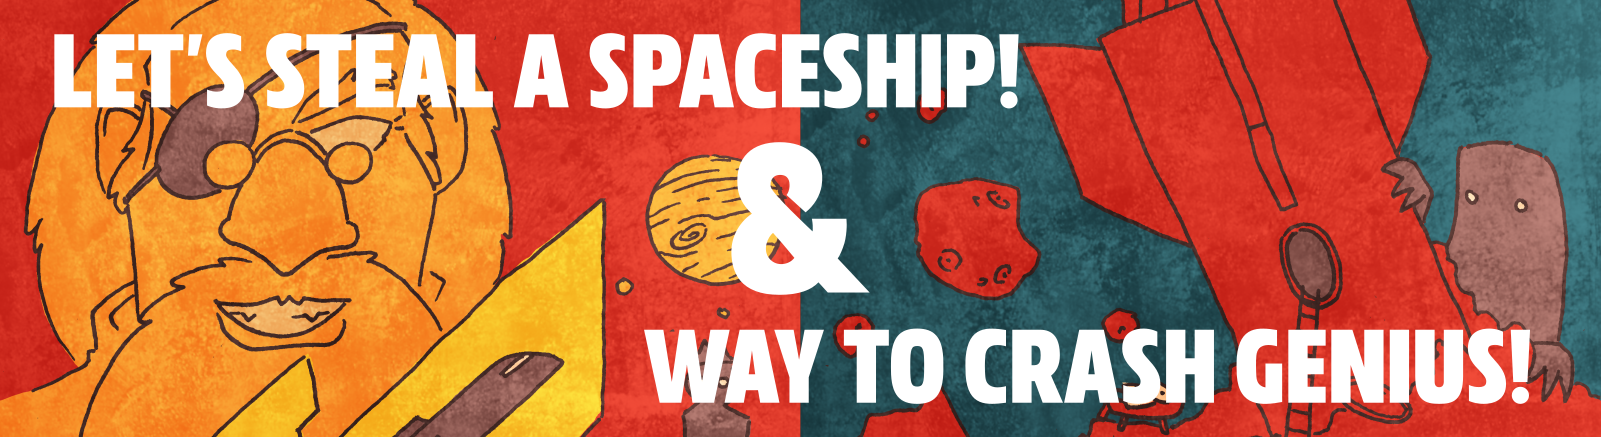 Let's Steal A Spaceship! and Way To Crash Genius!